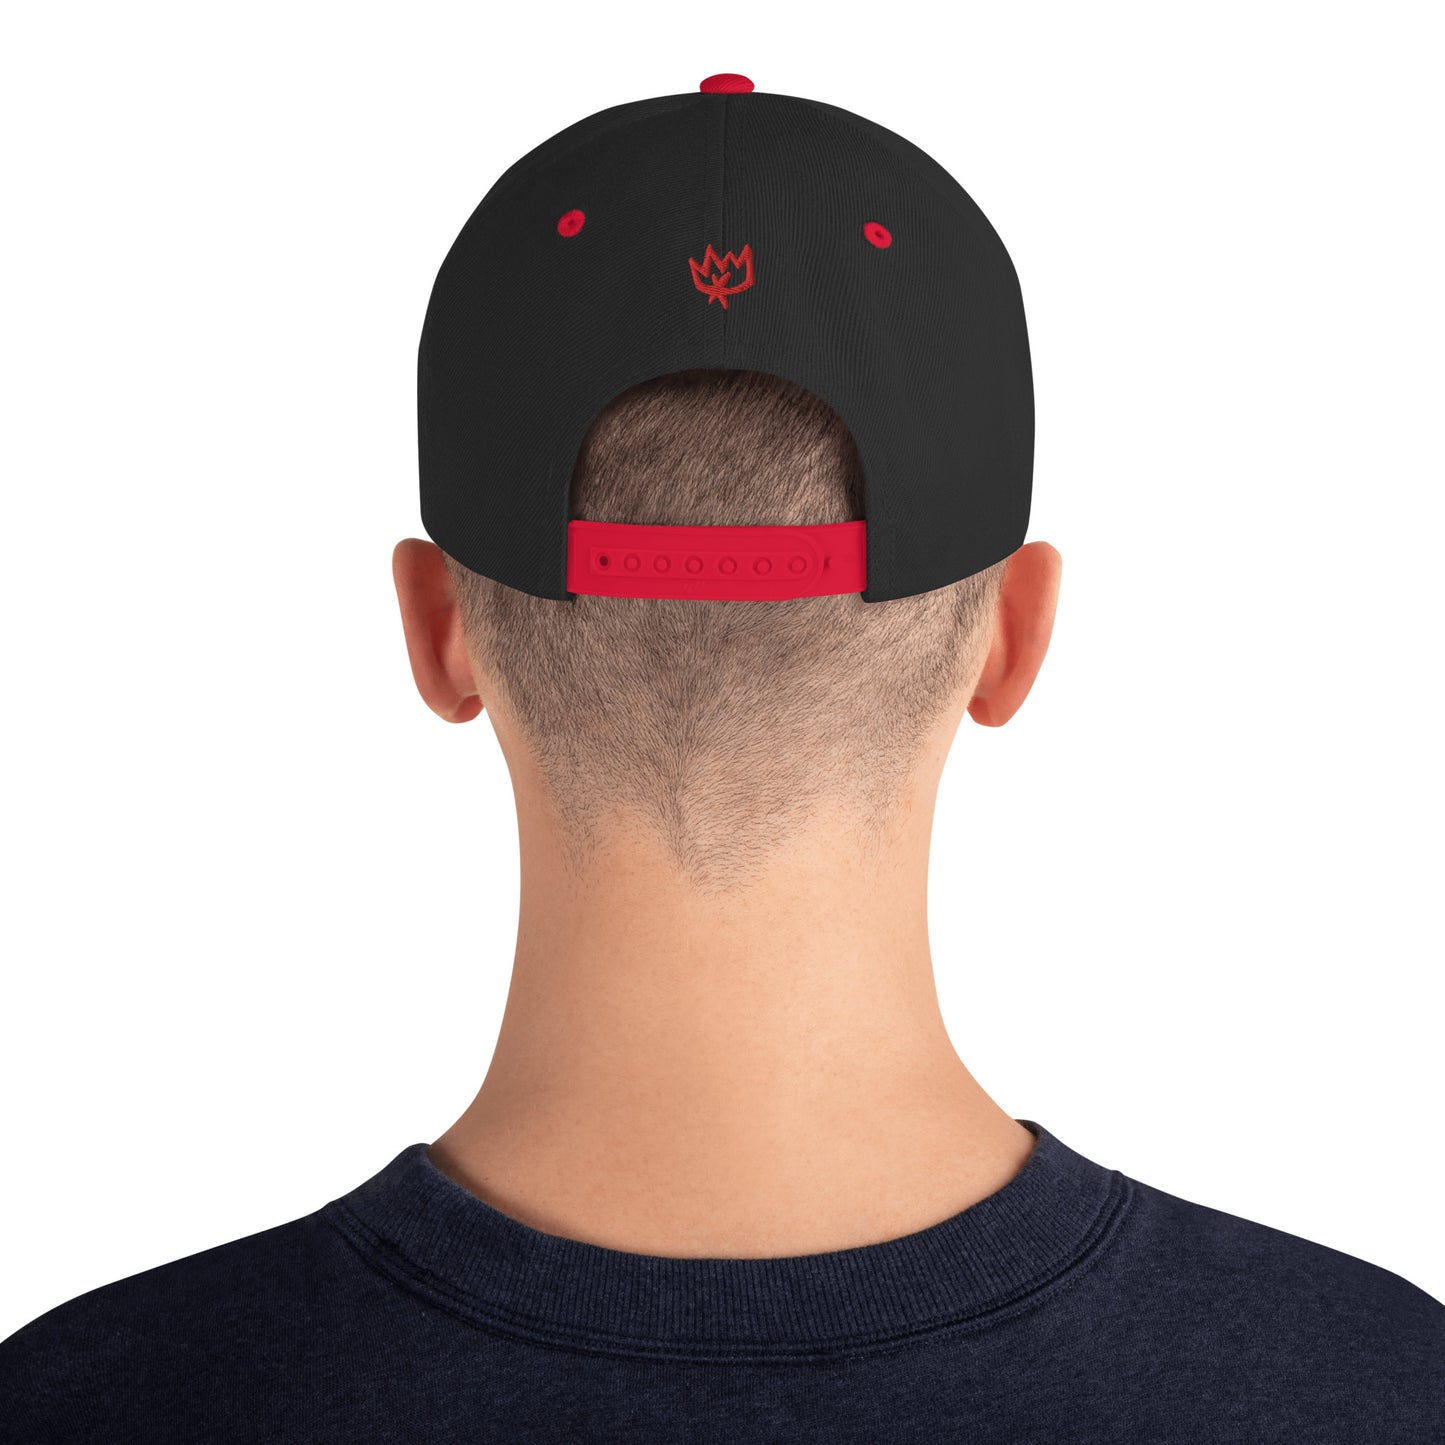 Red and Black Crown Snapback Hat